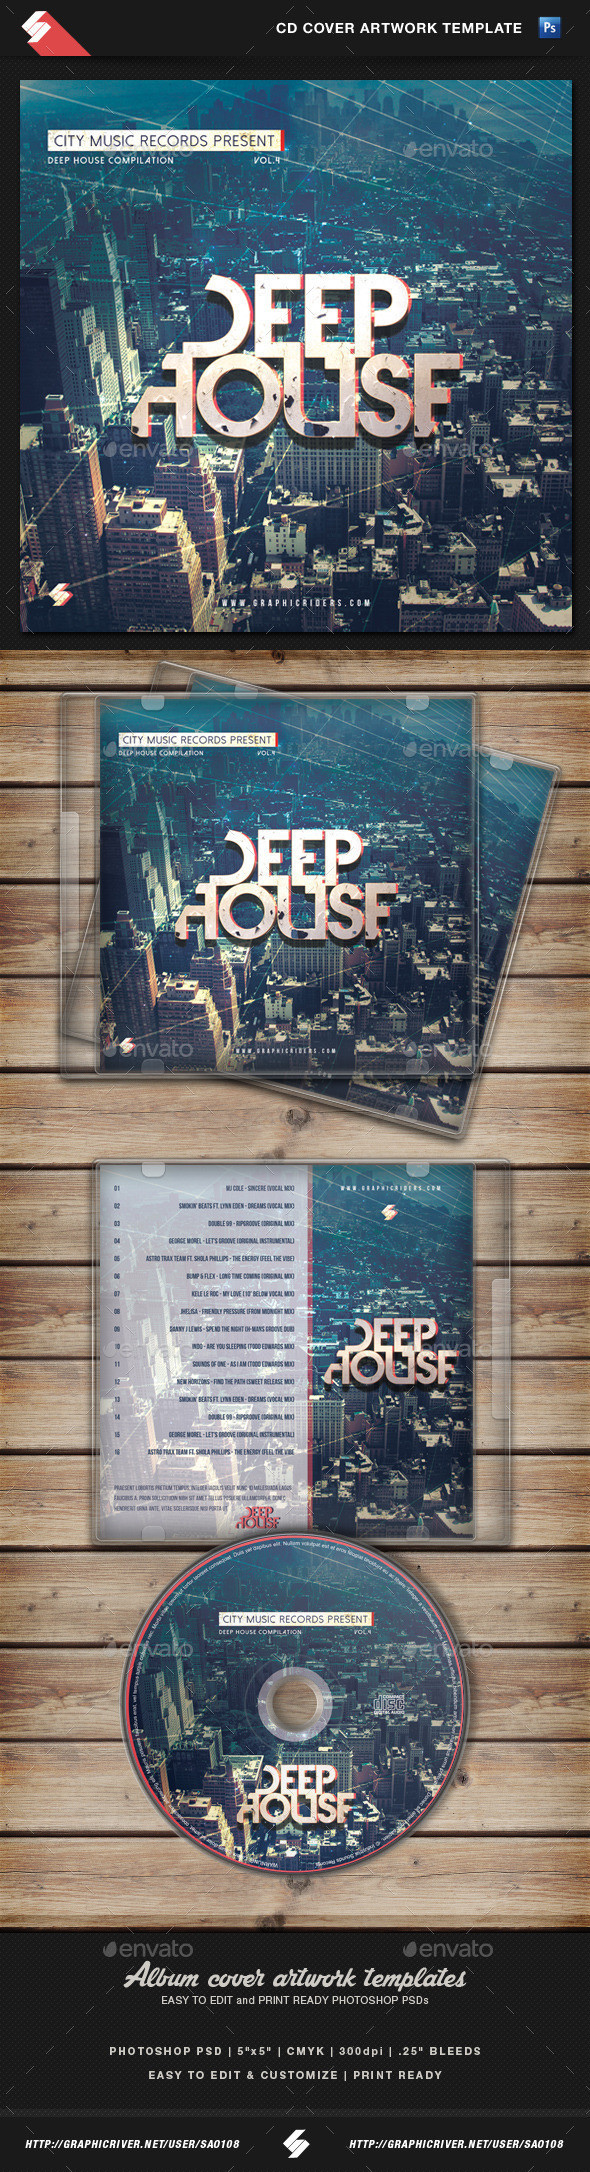 Deephouse cd cover template preview